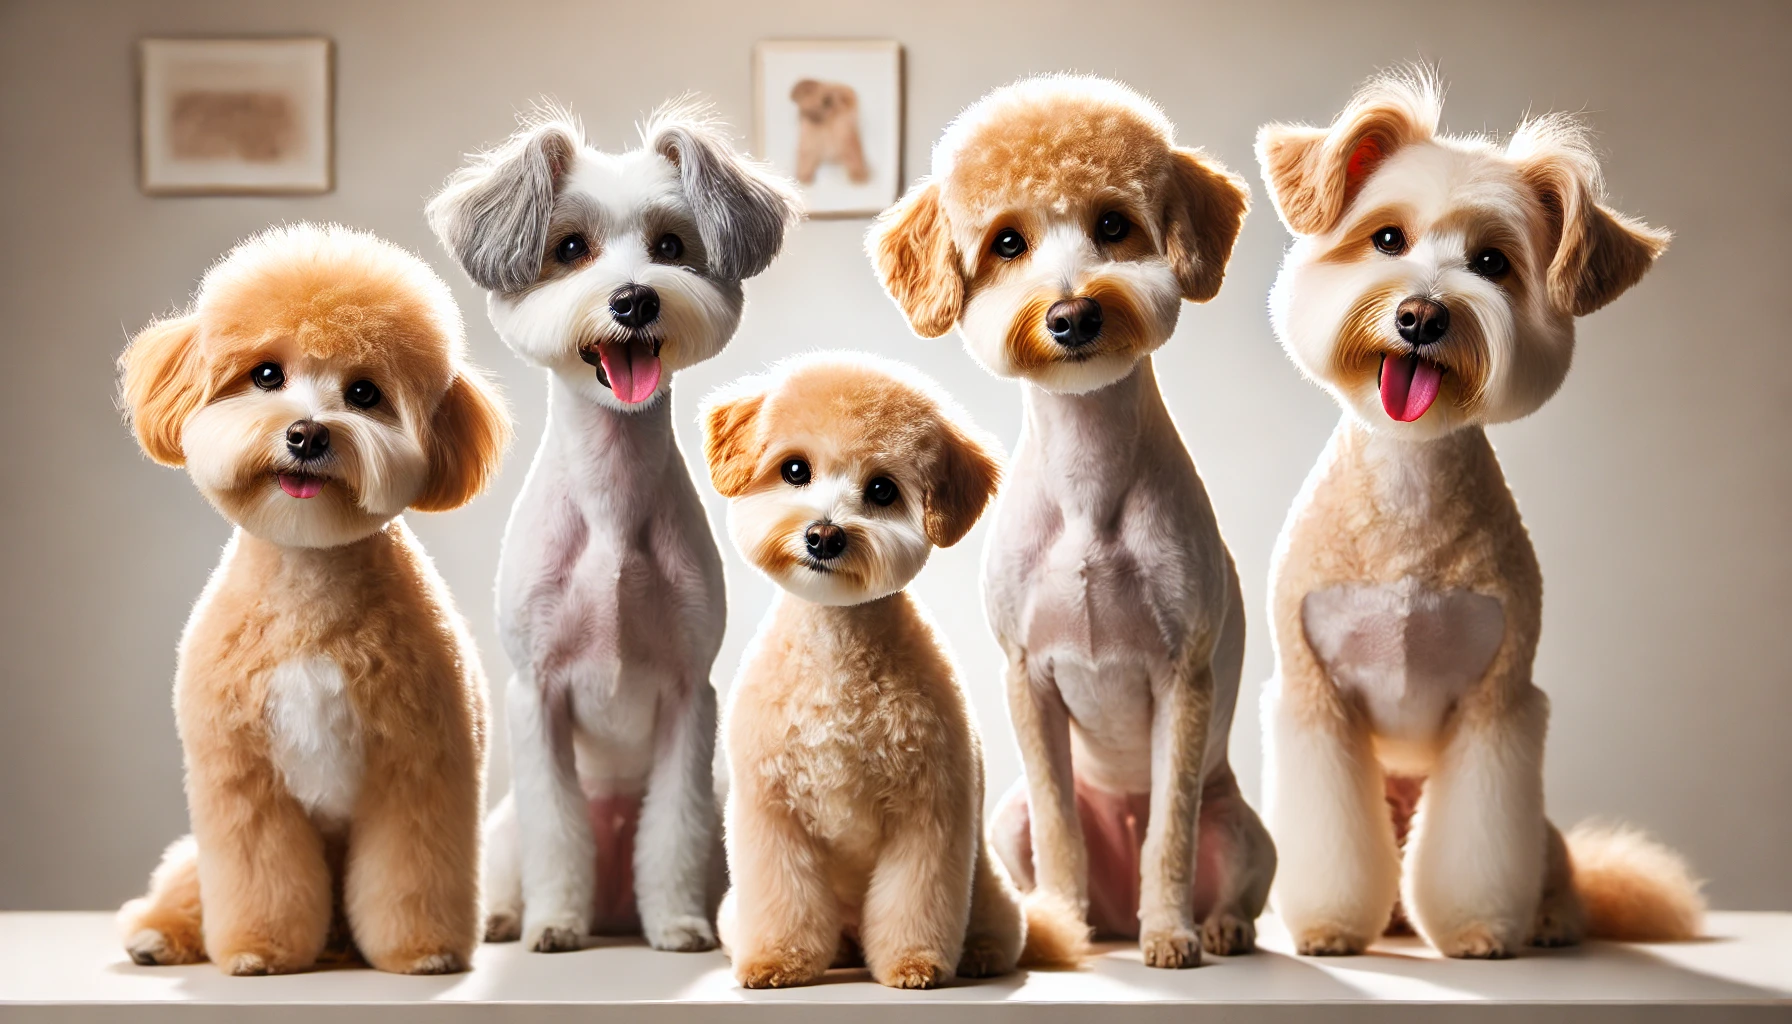  image of four Maltipoos side by side, each with a different haircut. One Maltipoo has a puppy cut, another has a summer cut